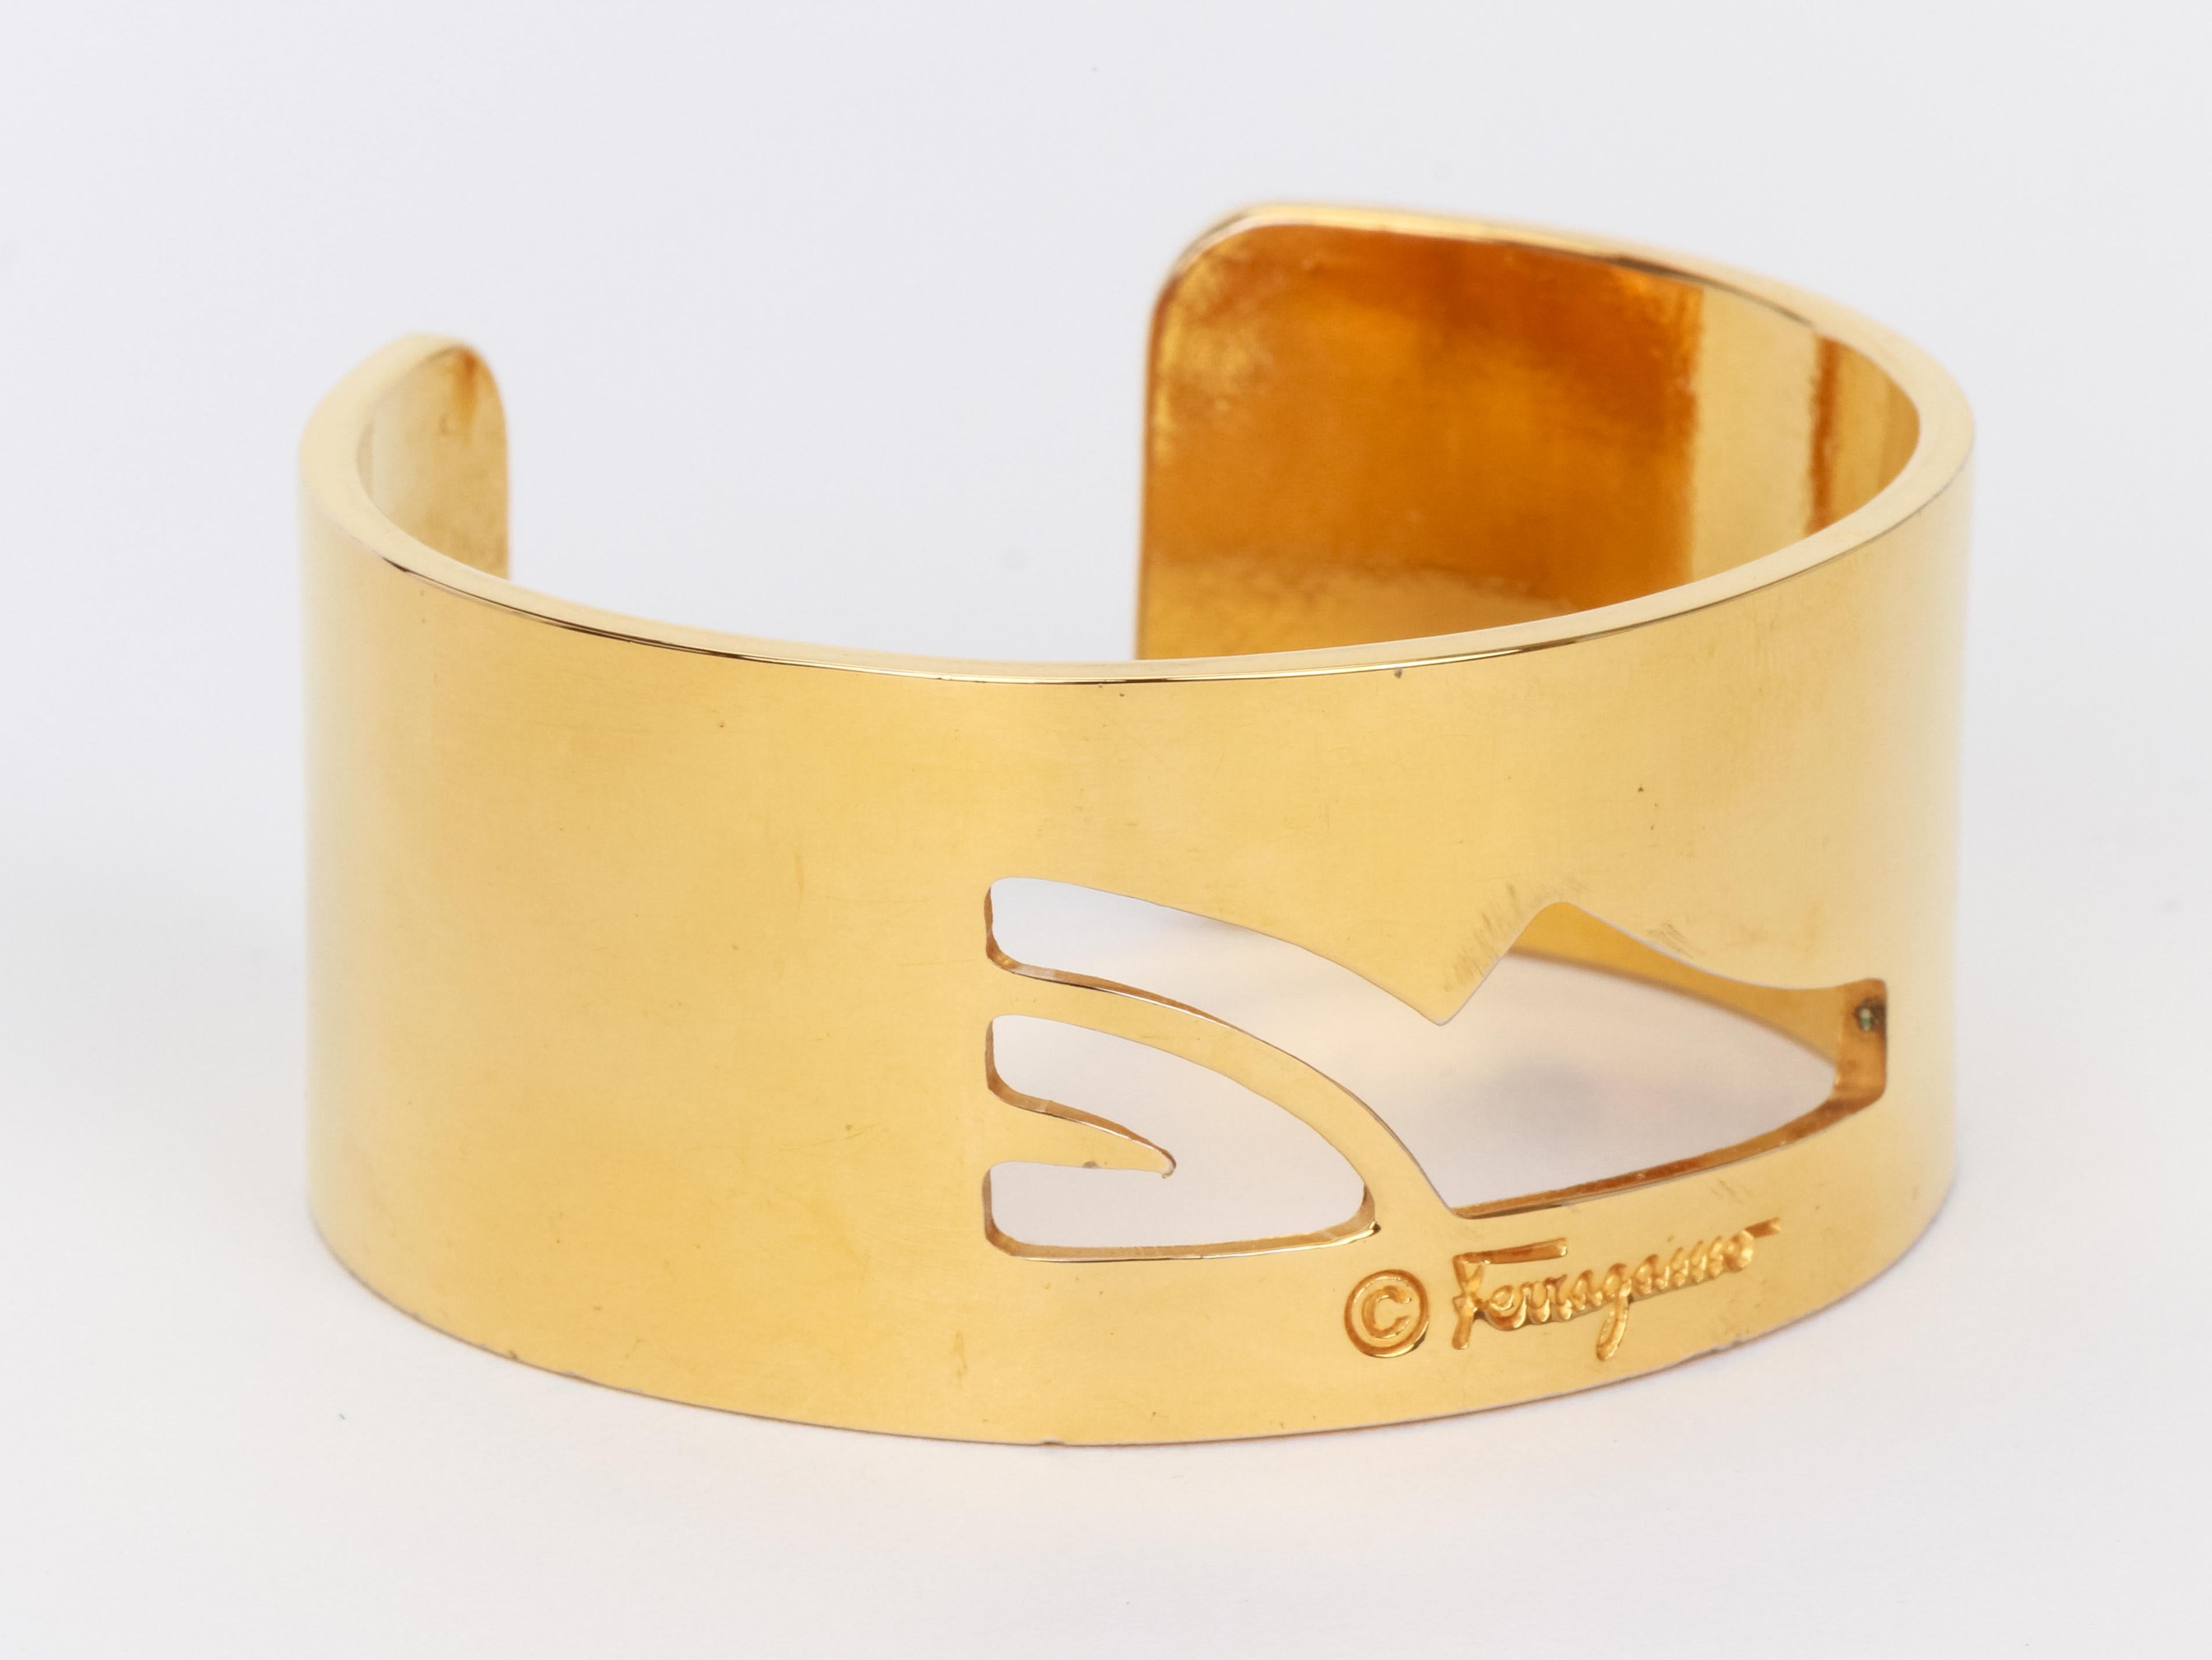 Ferragamo vintage gold tone cuff with cutout signature high heel shoe. Fits small and medium wrist, opening 1.1